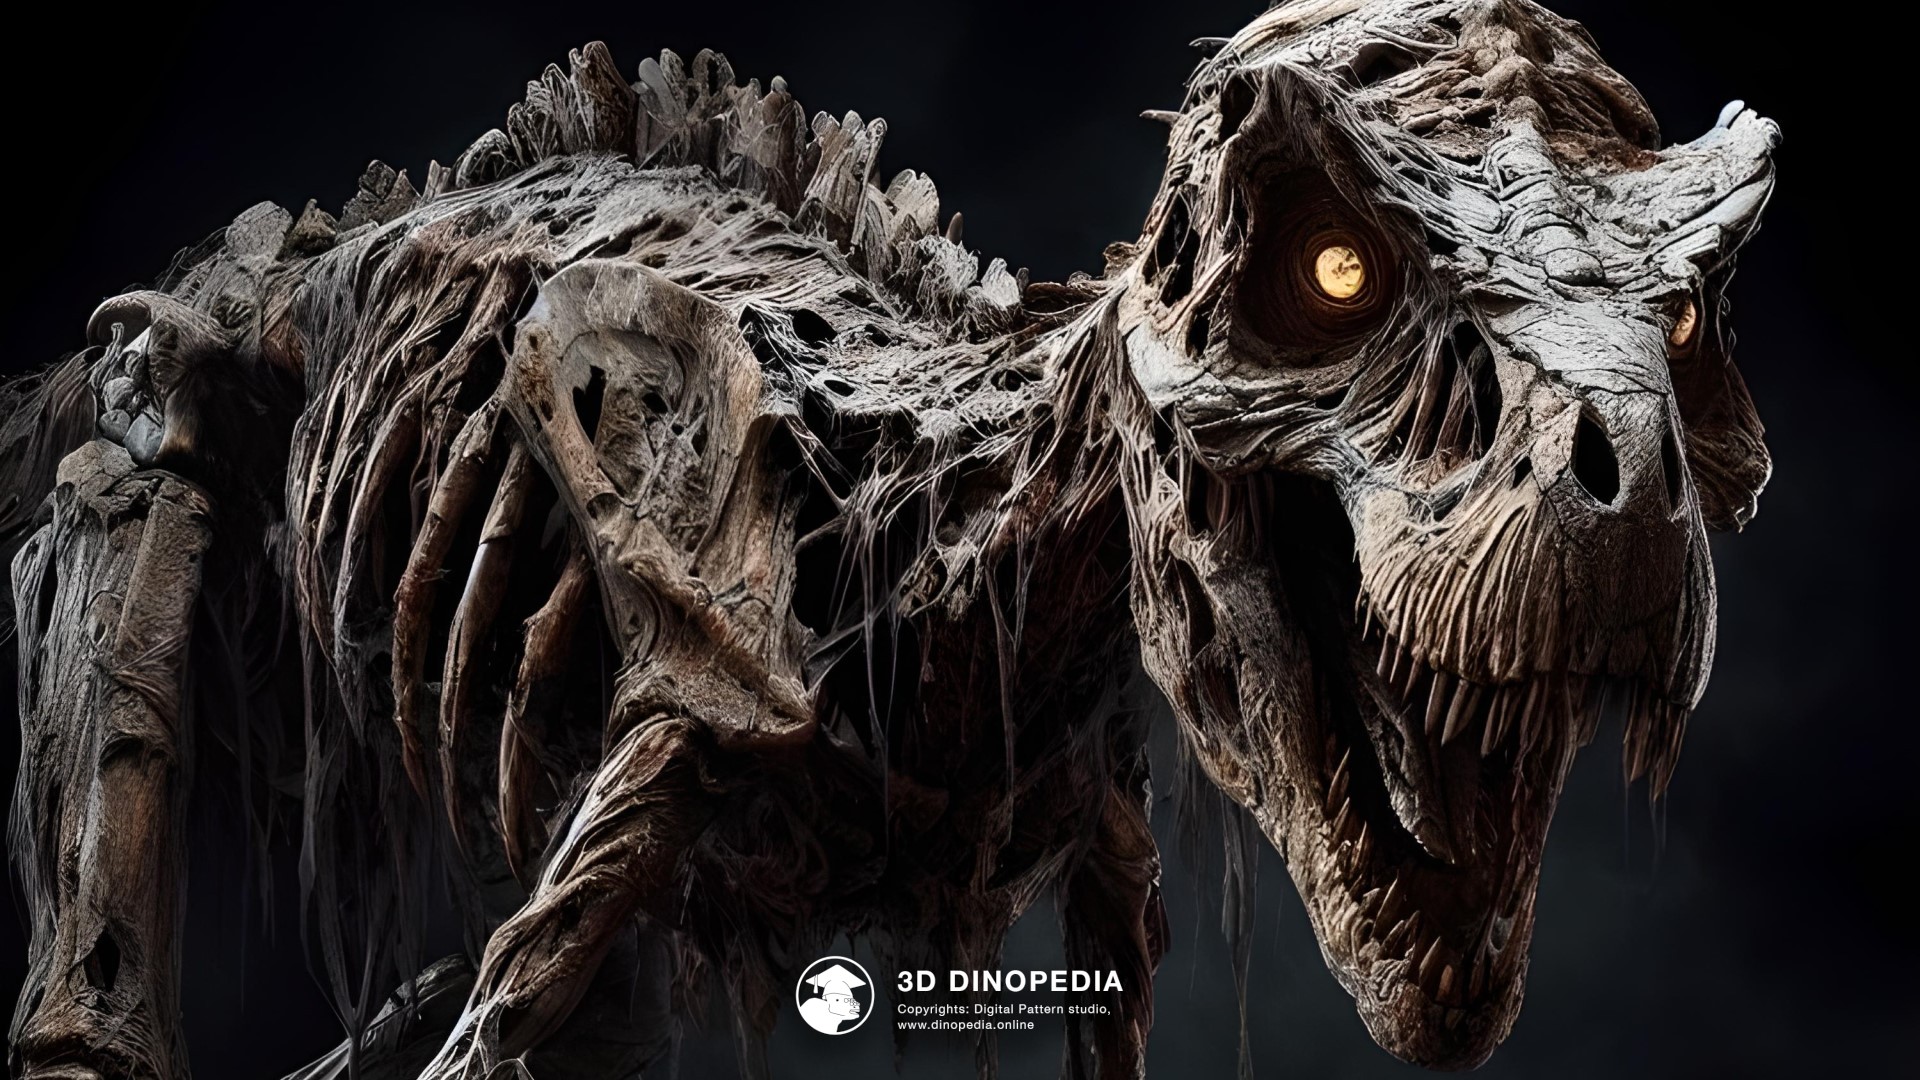 3D Dinopedia Halloween: Horror and Mystery in 3D Dinopedia